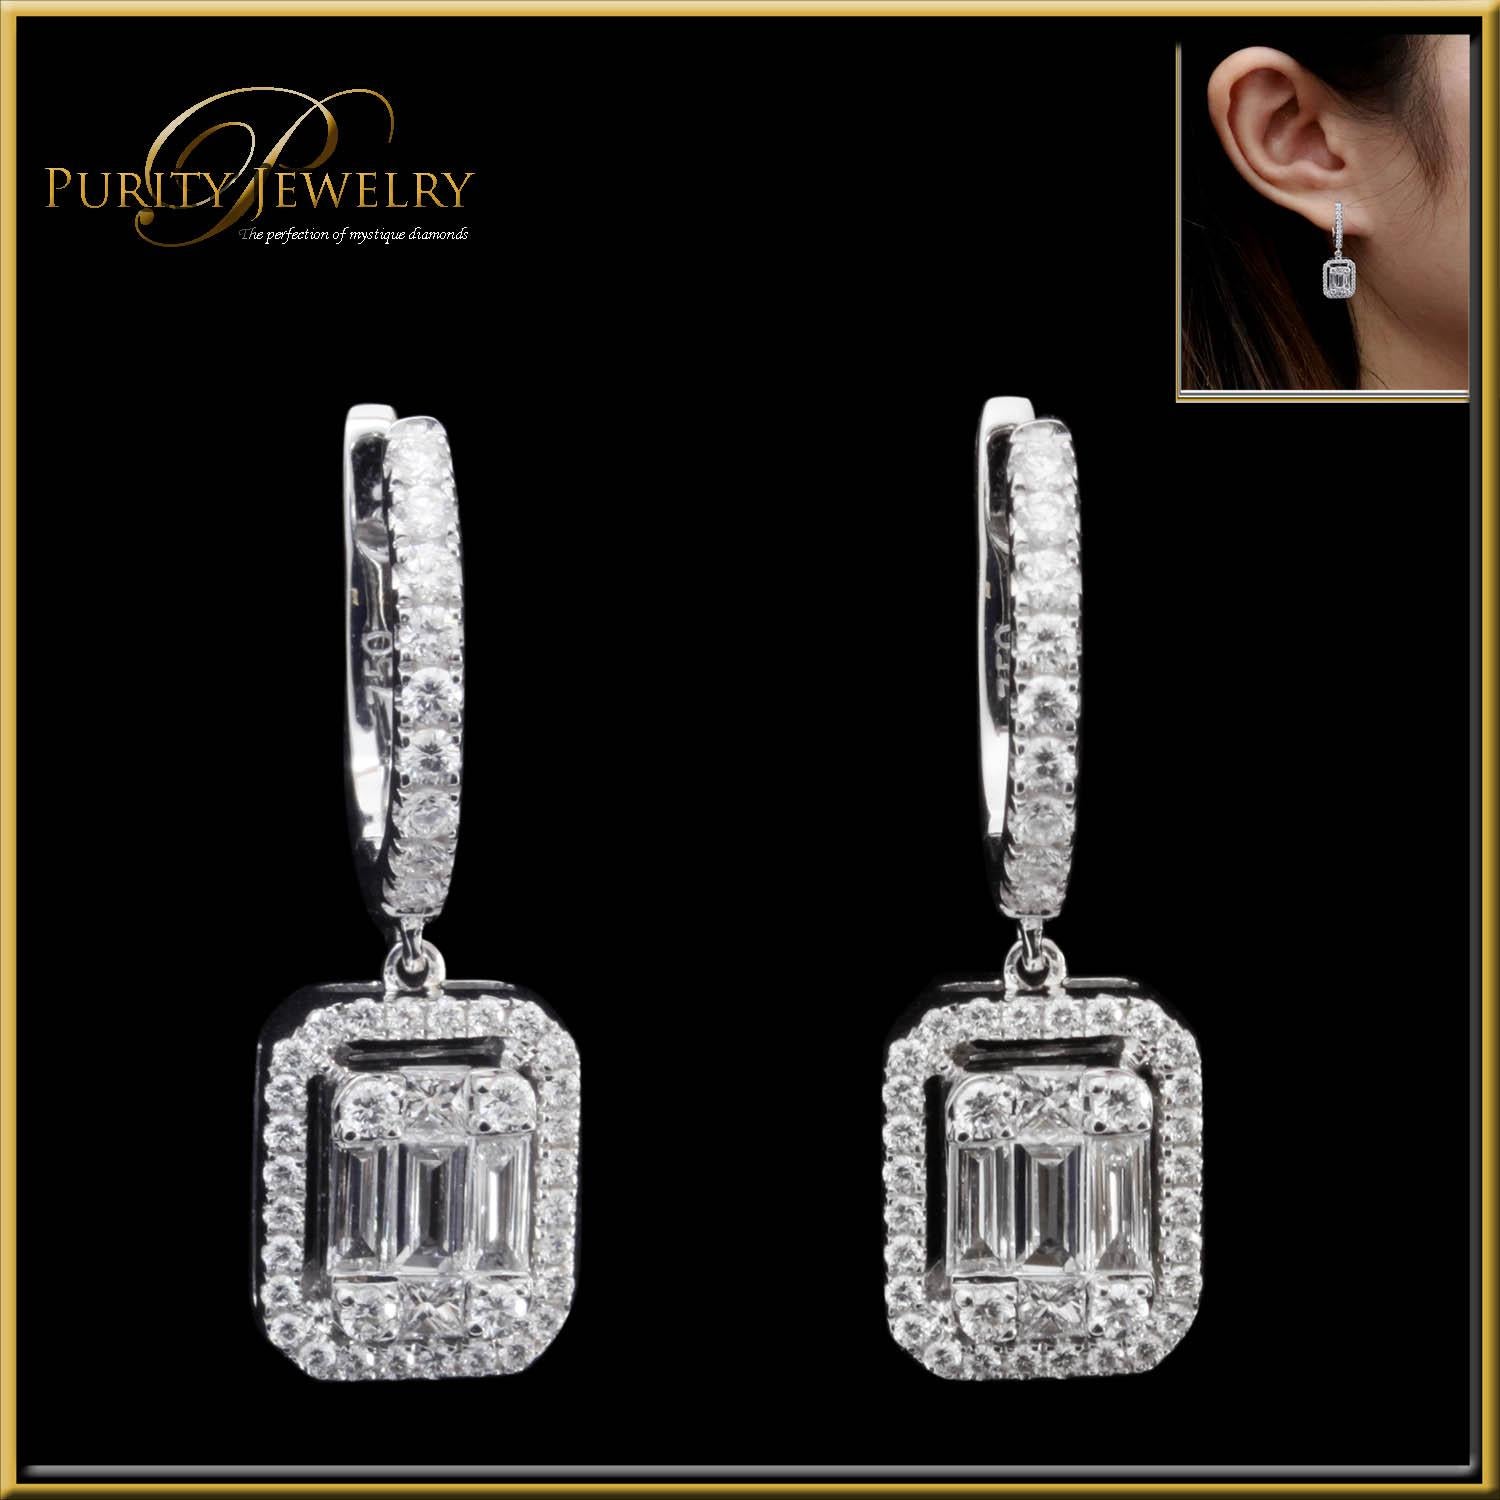 Diamond Fashion Earring, using baguettes shaped diamonds to create this unique fashion earring. 
The baguette illusions create a large 1.5ct emerald cut look.
The piece is crafted in - house by our master craftsmen in Thailand. 
This earring is